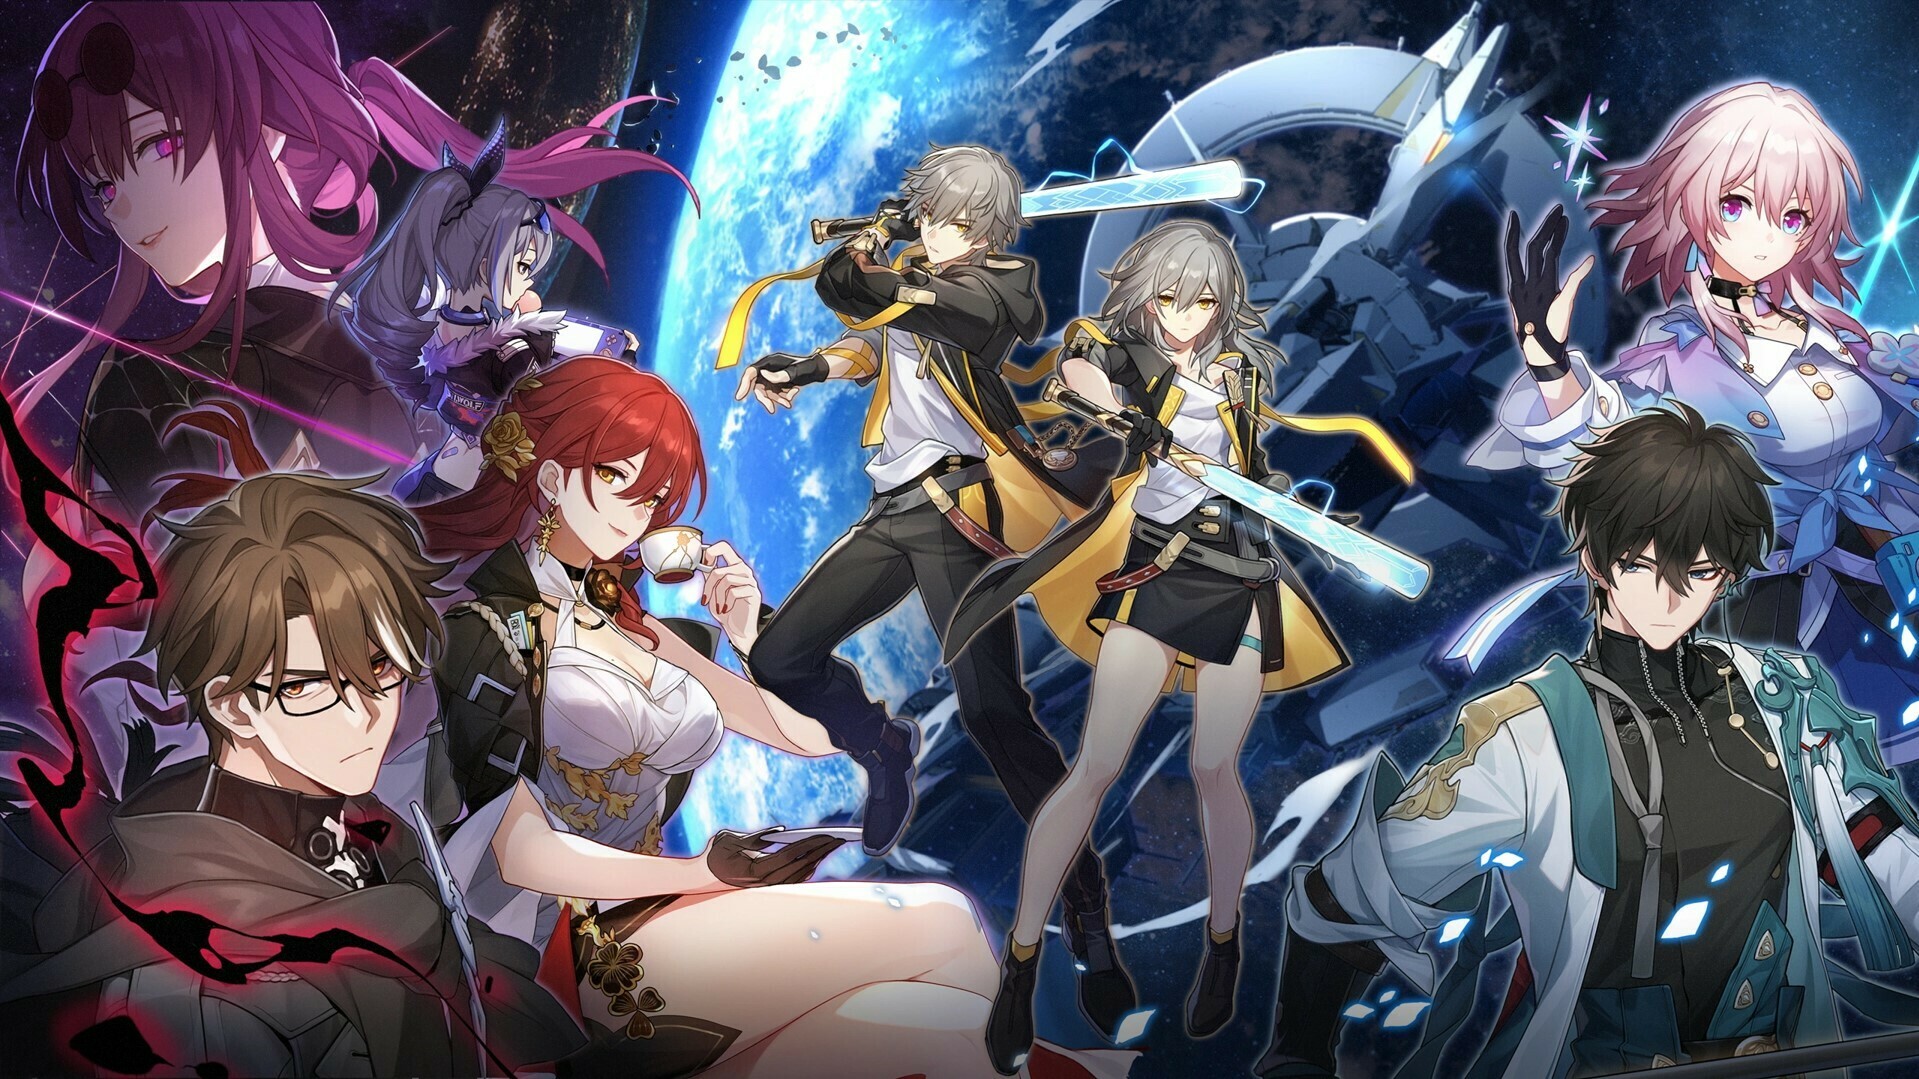 Honkai: Star Rail 1.1 banners to feature Silver Wolf, Luocha, and